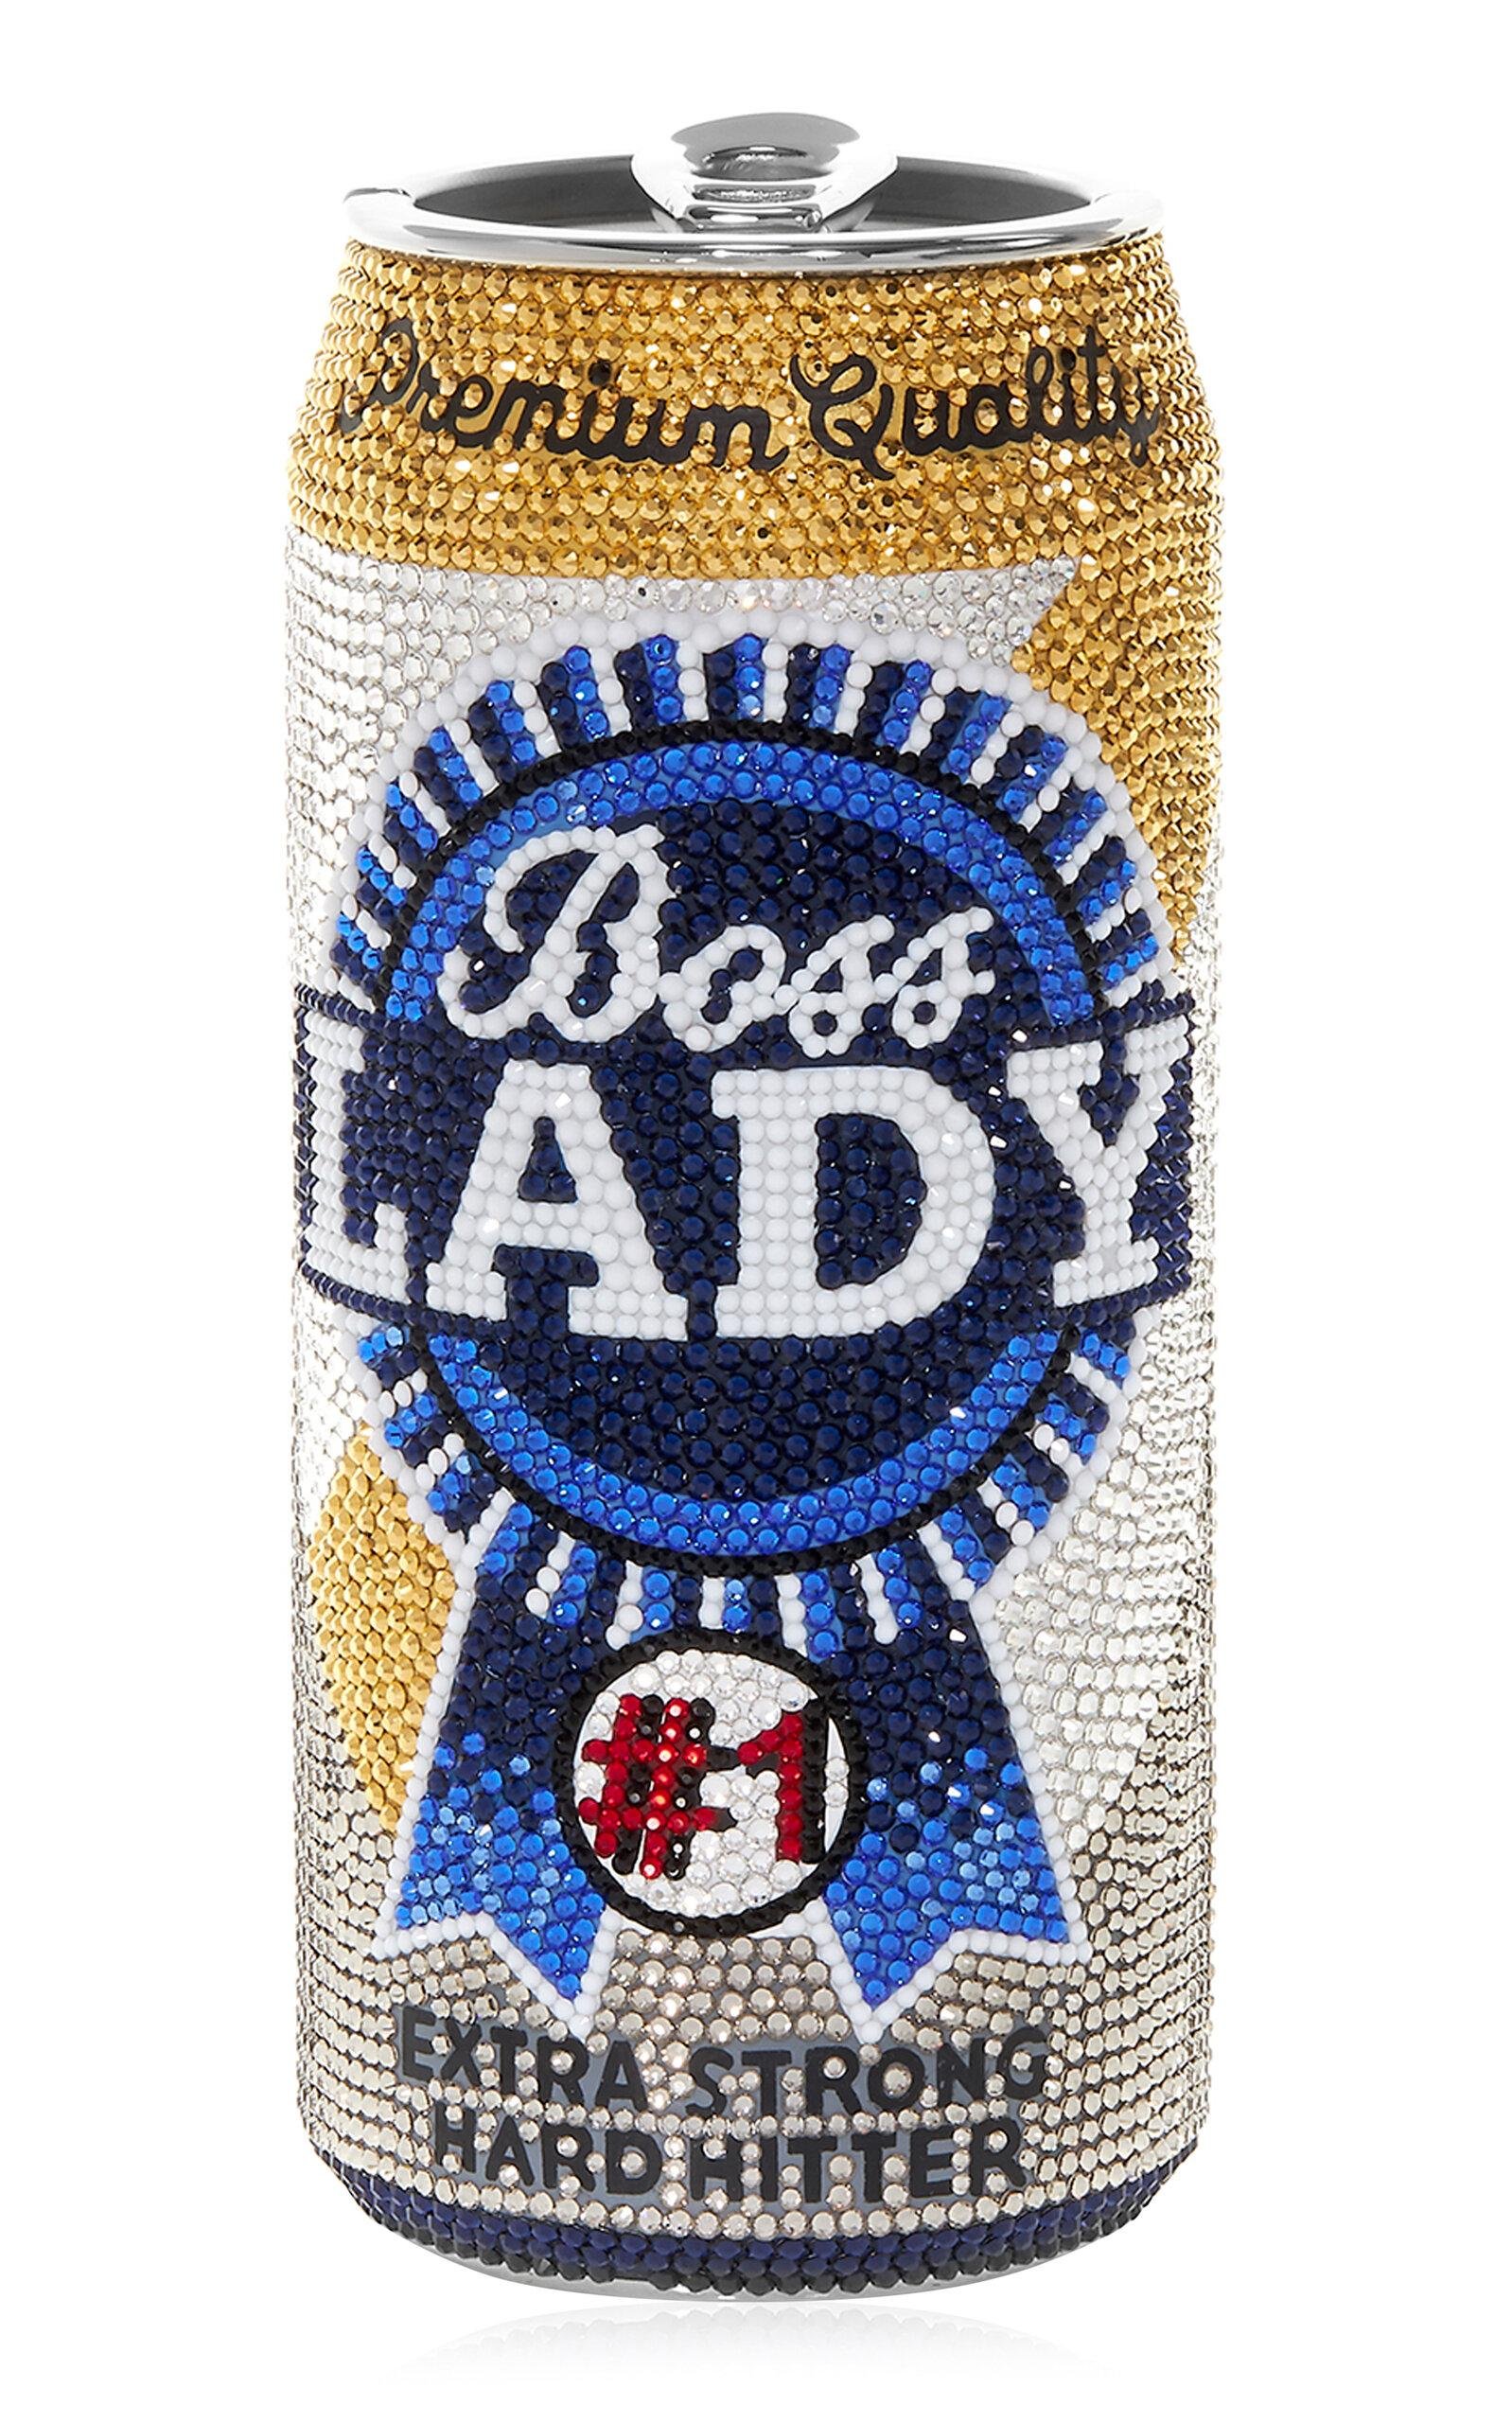 Judith Leiber Couture - Boss Lady Beverage Can Crystal Clutch - Blue - OS - Only At Moda Operandi by JUDITH LEIBER COUTURE